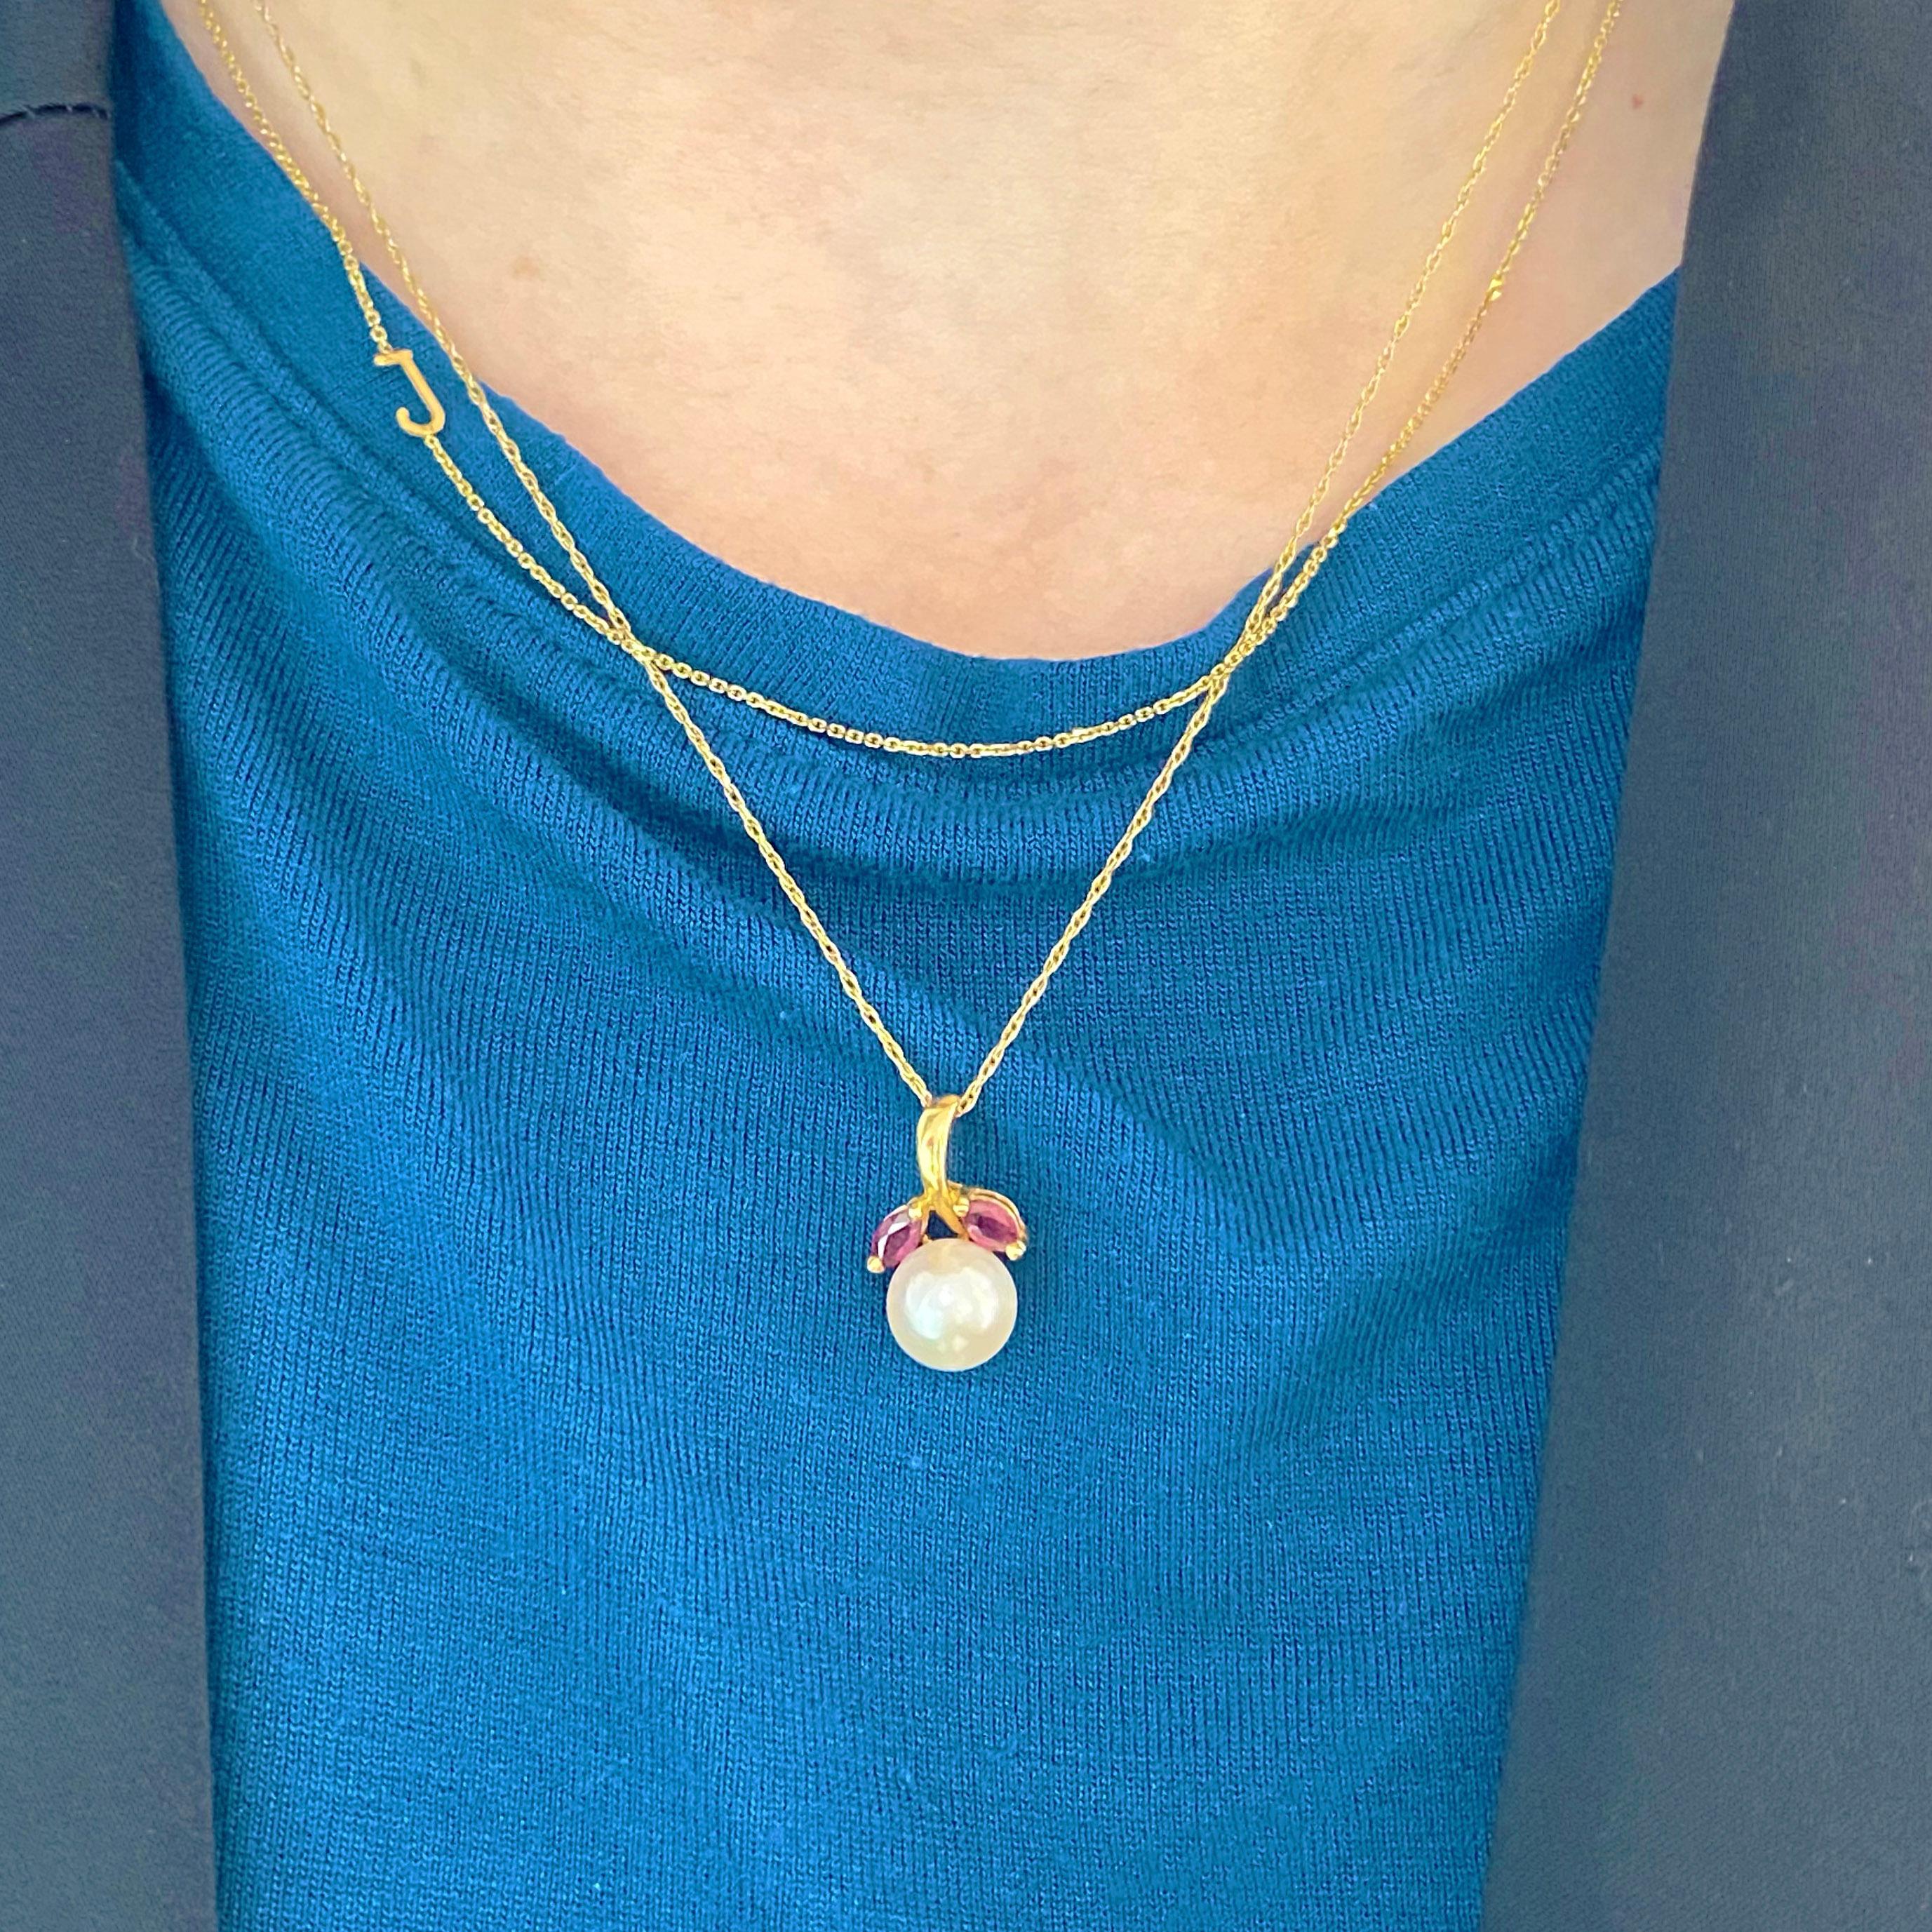 Pearls and rubies are a beautiful combination and this pendant has this very design!  The genuine cultured salt water, Japanese pearl has a gorgeous luster, orient, and a beautiful white color.  There are two gorgeous marquise red rubies accenting